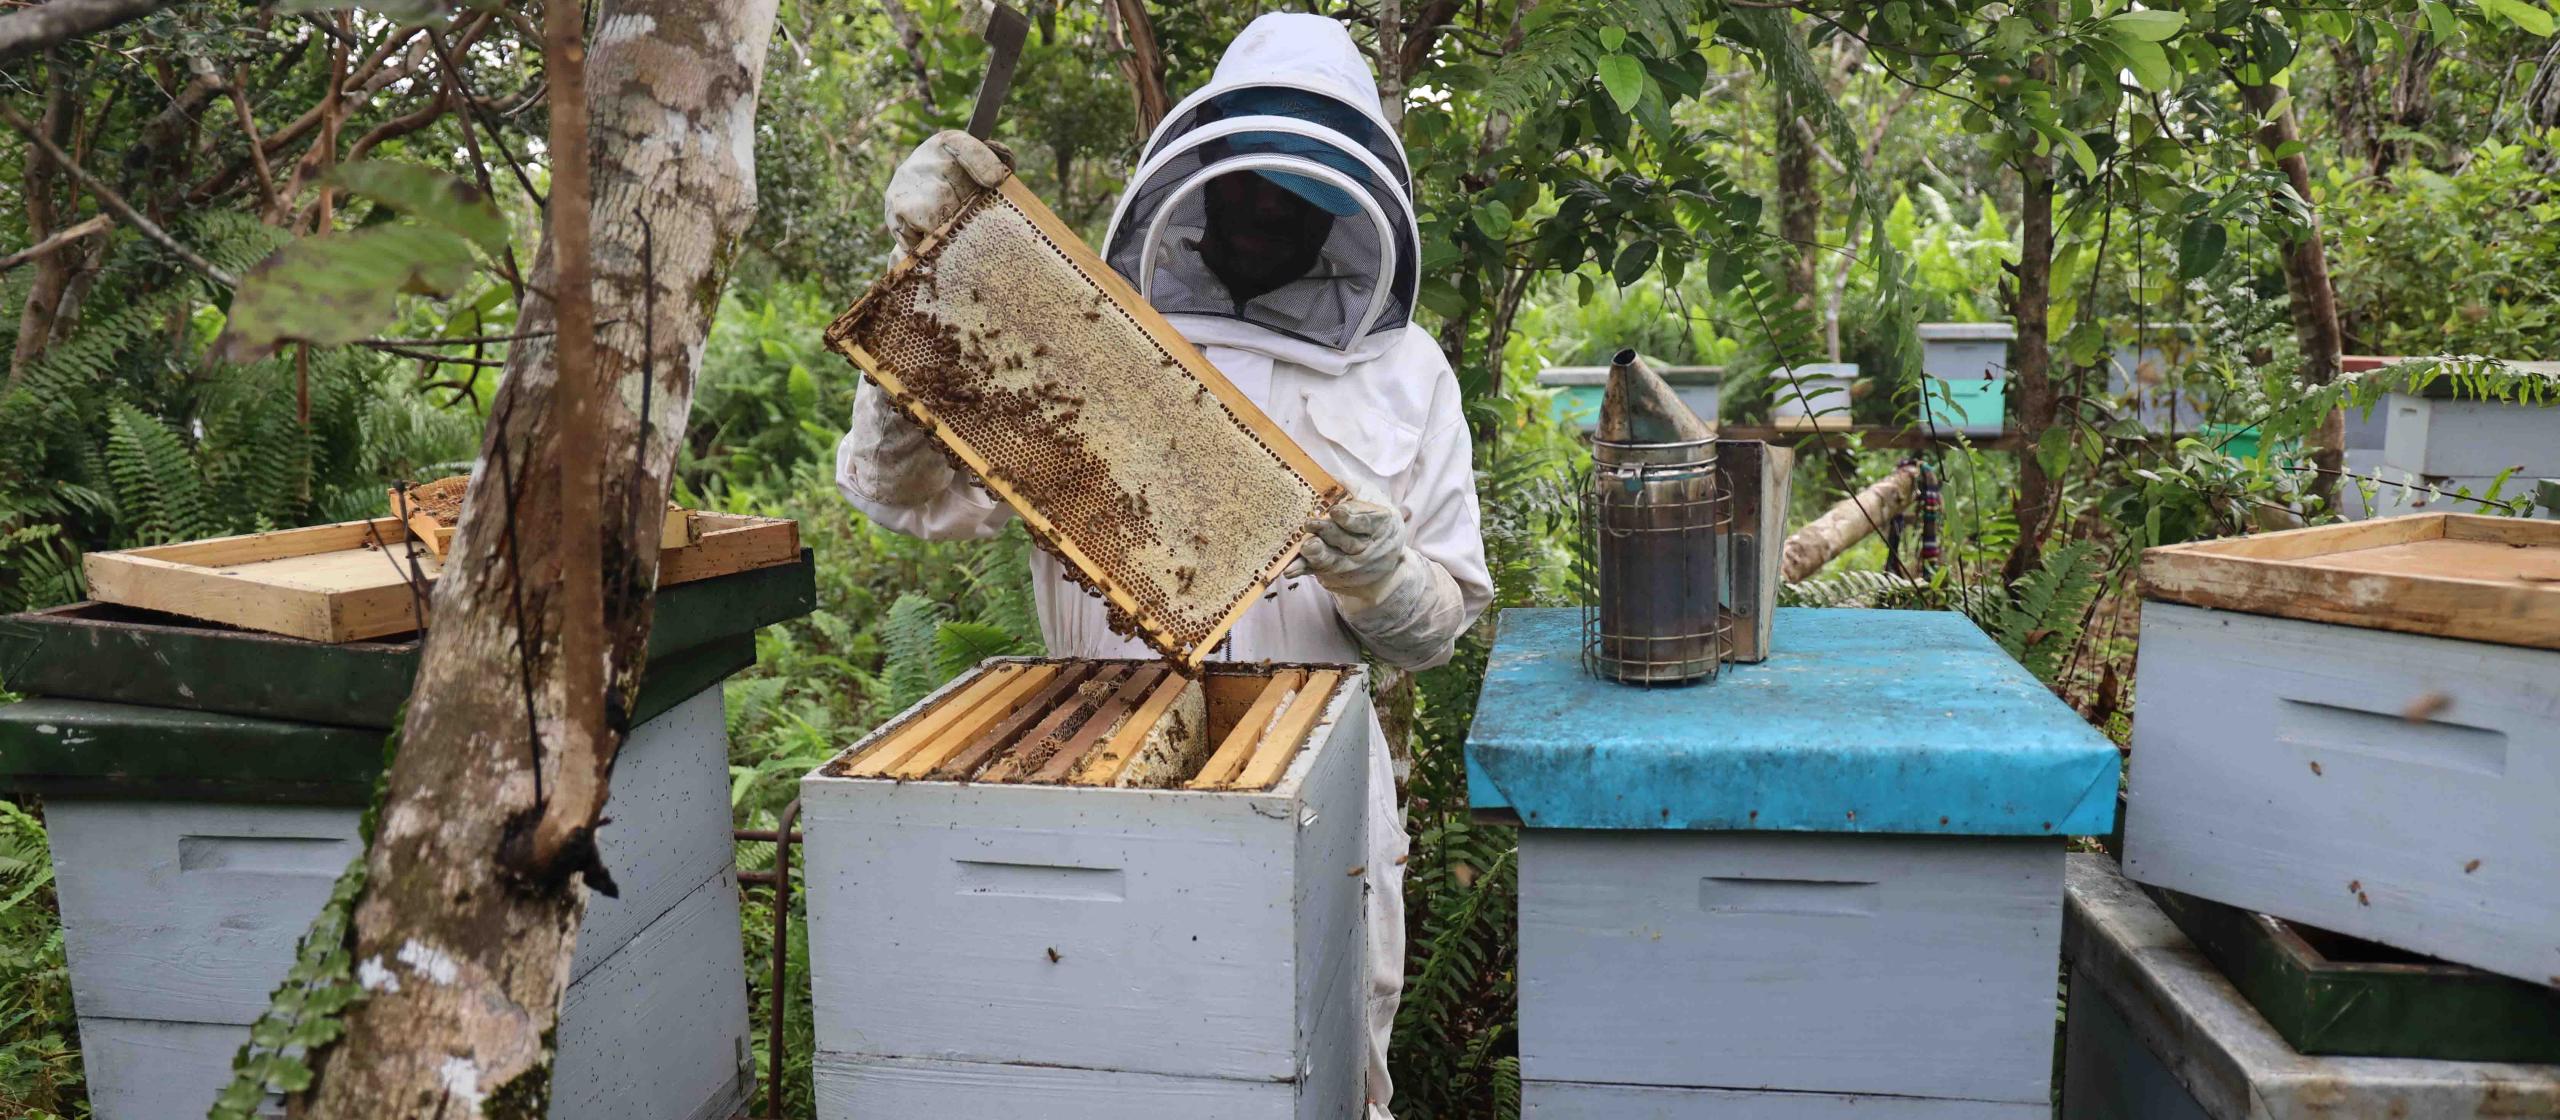 Beekeeper inspecting the hive